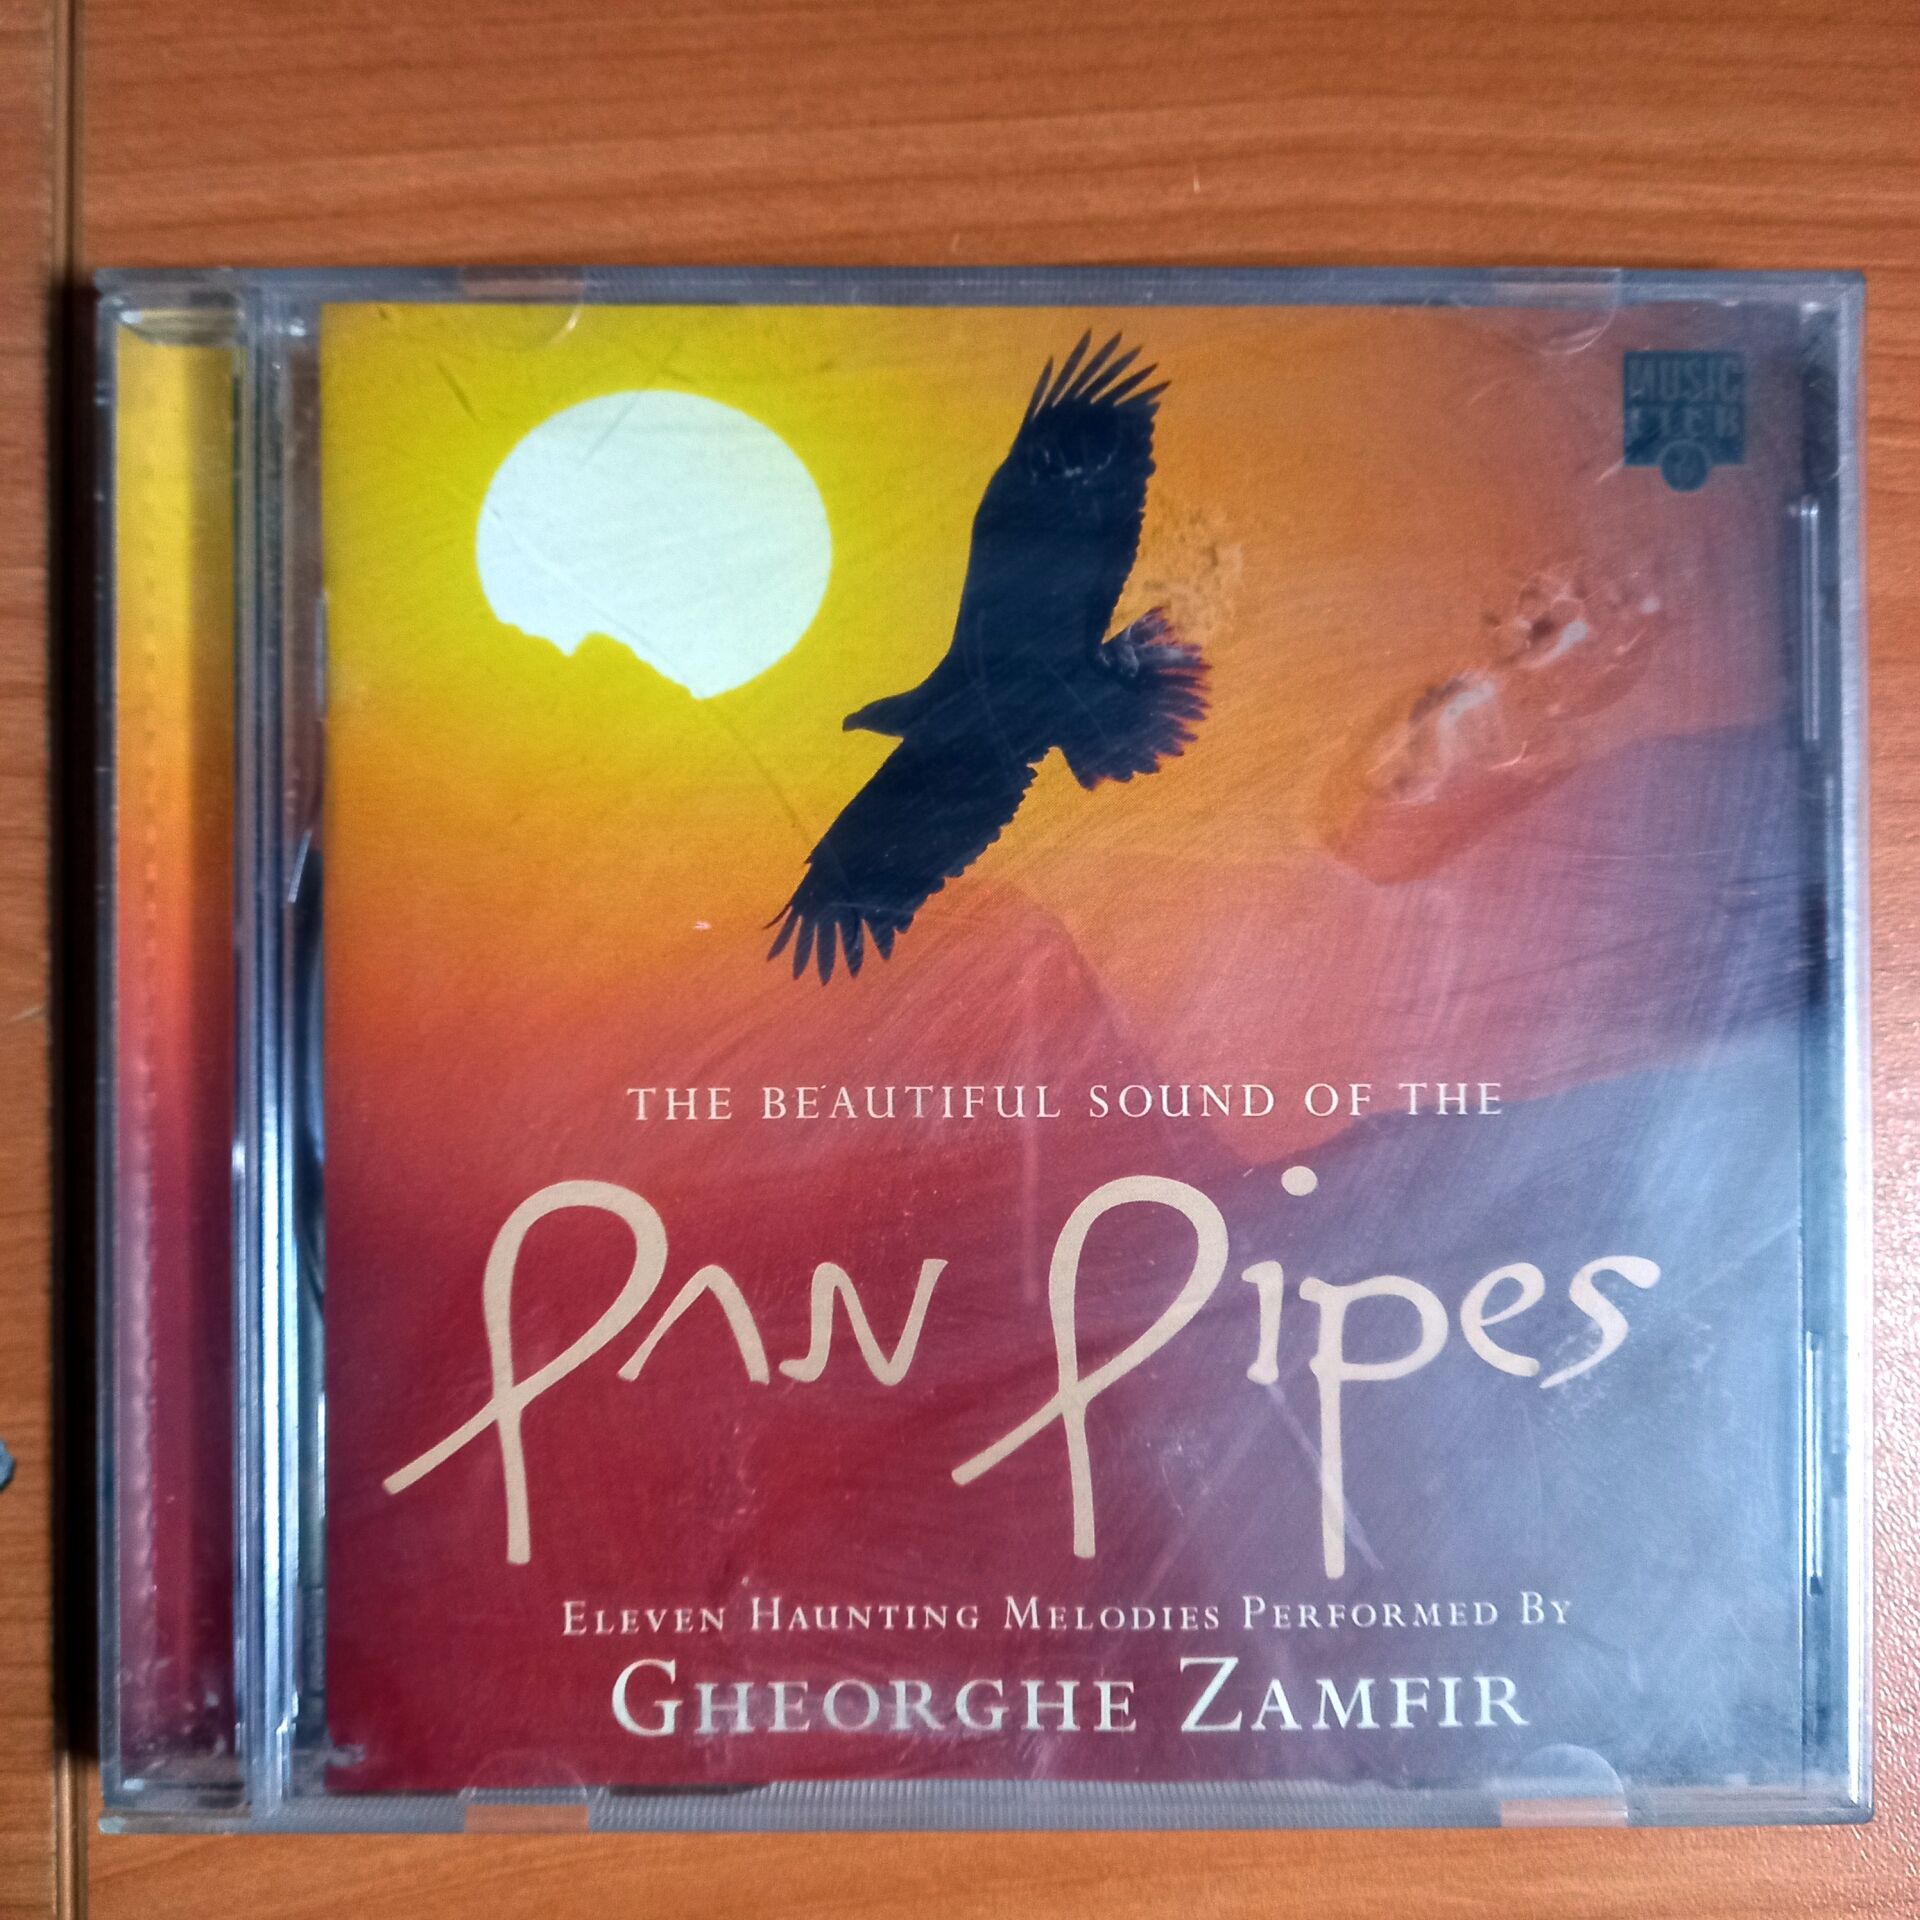 GHEORGHE ZAMFIR – THE BEAUTIFUL SOUND OF THE PAN PIPES (1995) - CD 2.EL